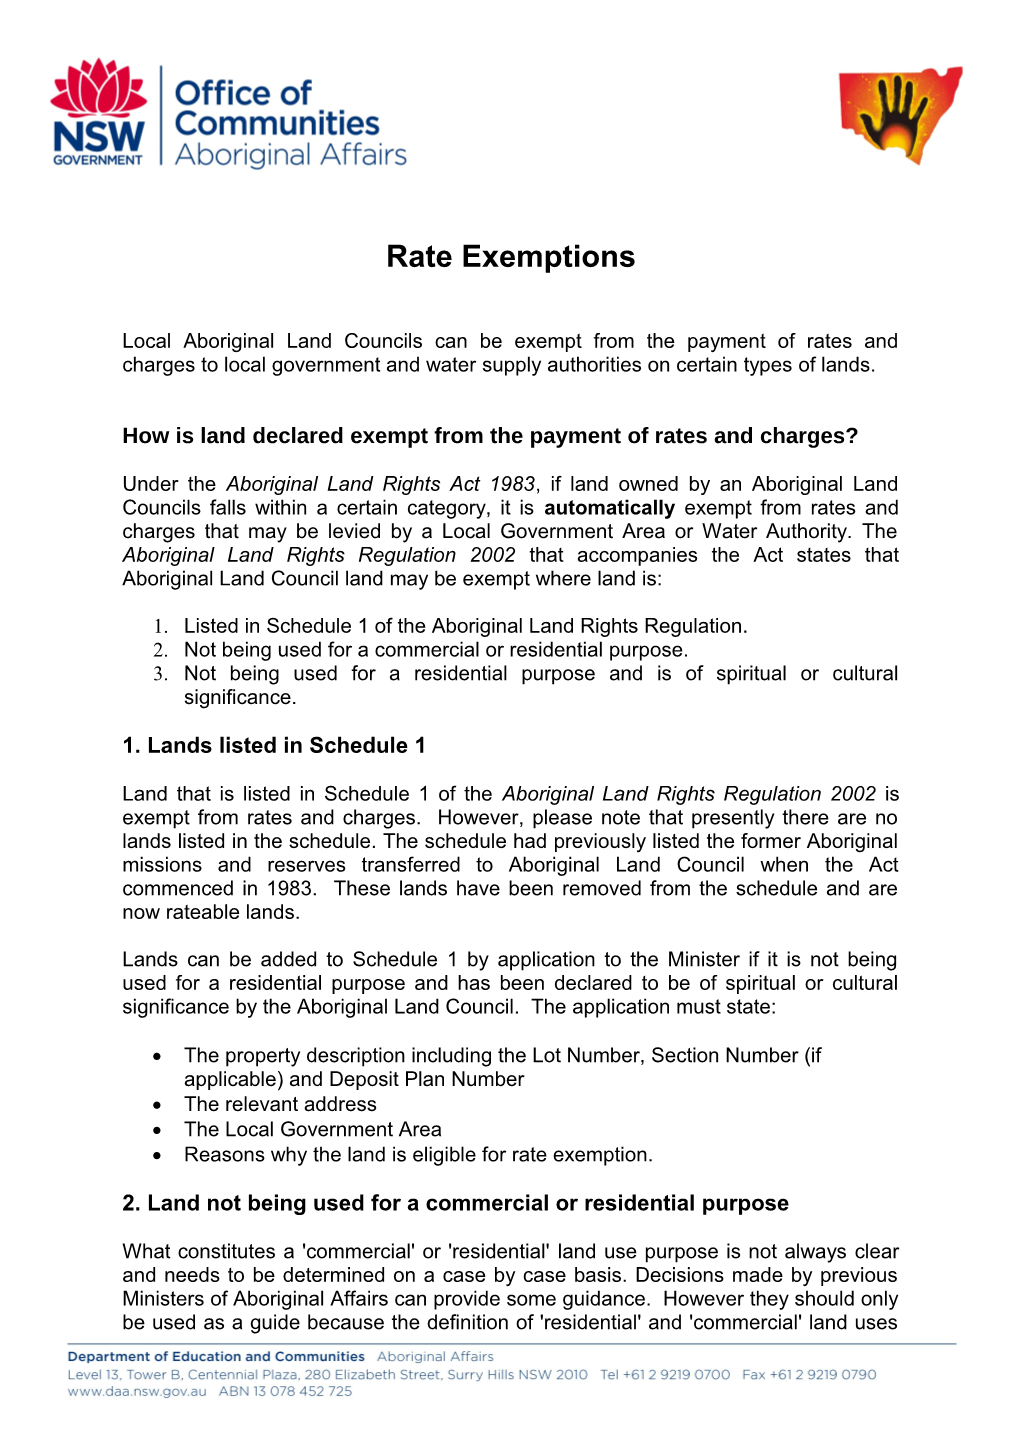 How Is Land Declared Exempt from the Payment of Rates and Charges?